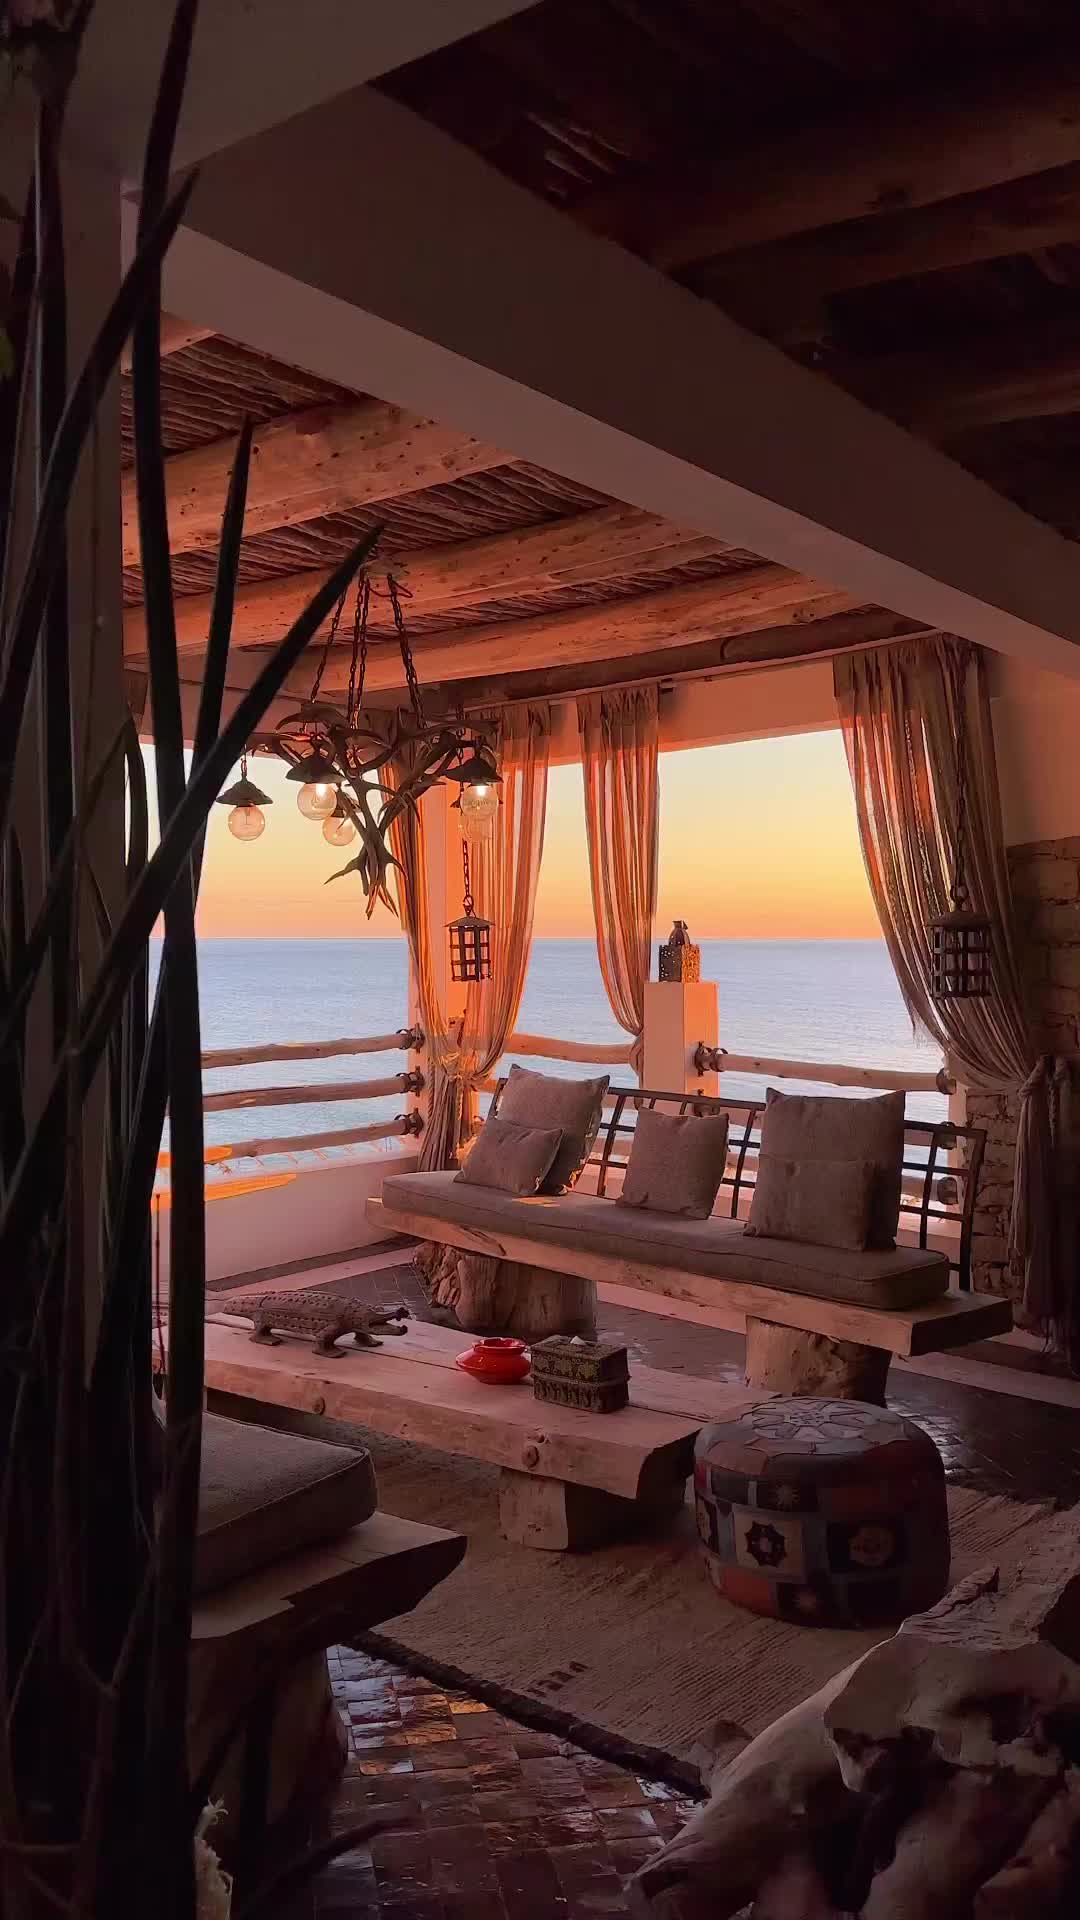 Discover Munga Guesthouse in Taghazout, Morocco 🌅